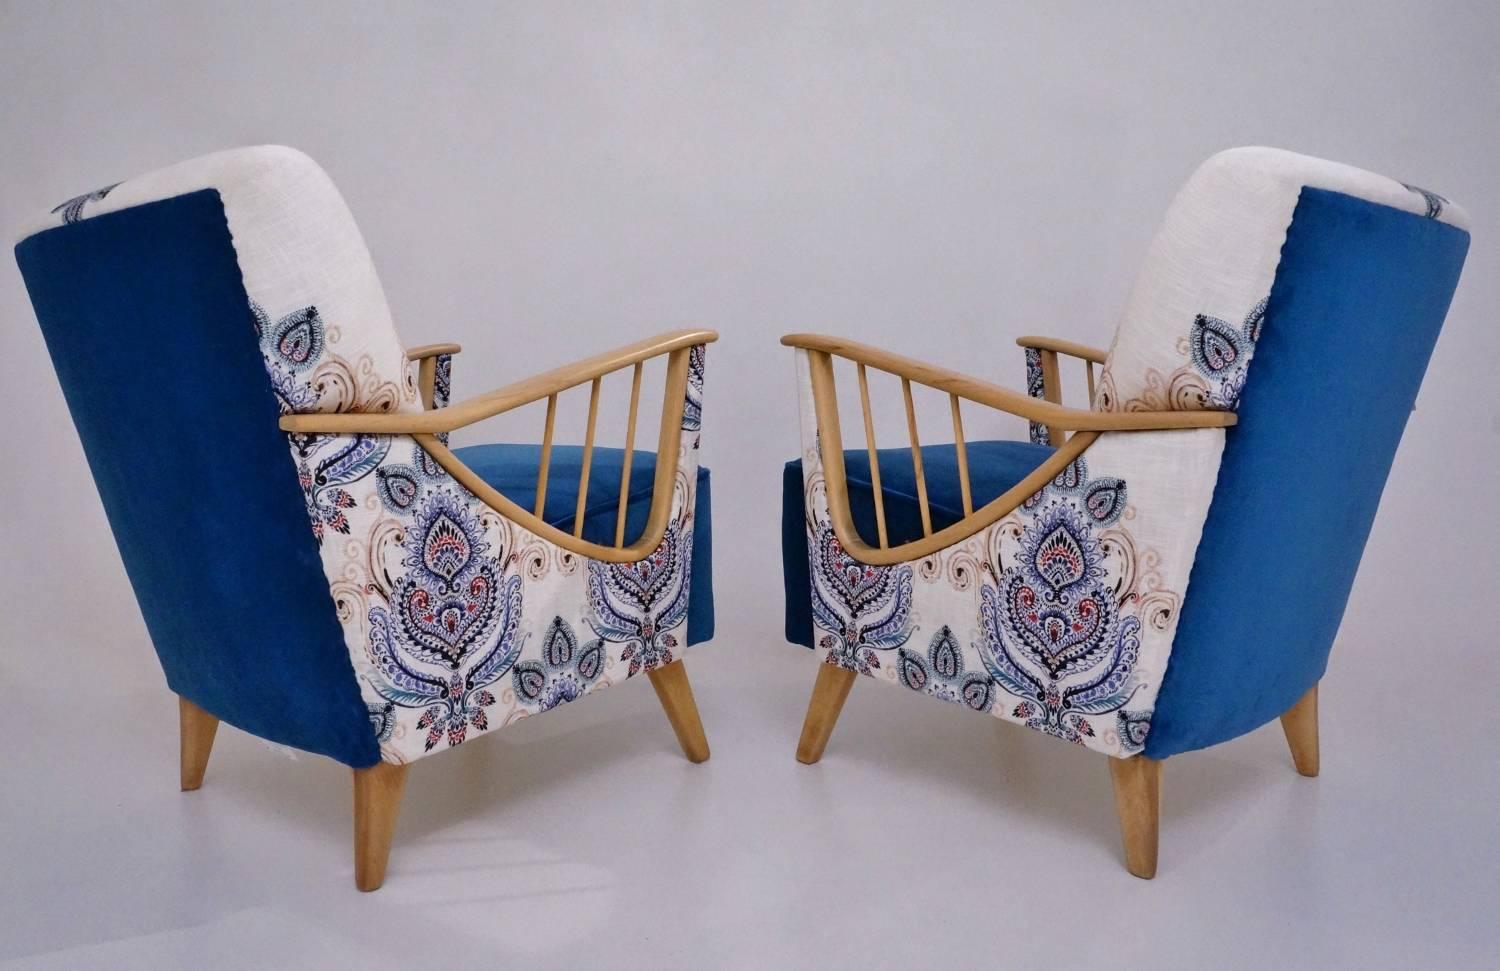 Mid-Century Modern Ercol Windsor Armchairs, a Pair, Newly Upholstered, circa 1950s, English